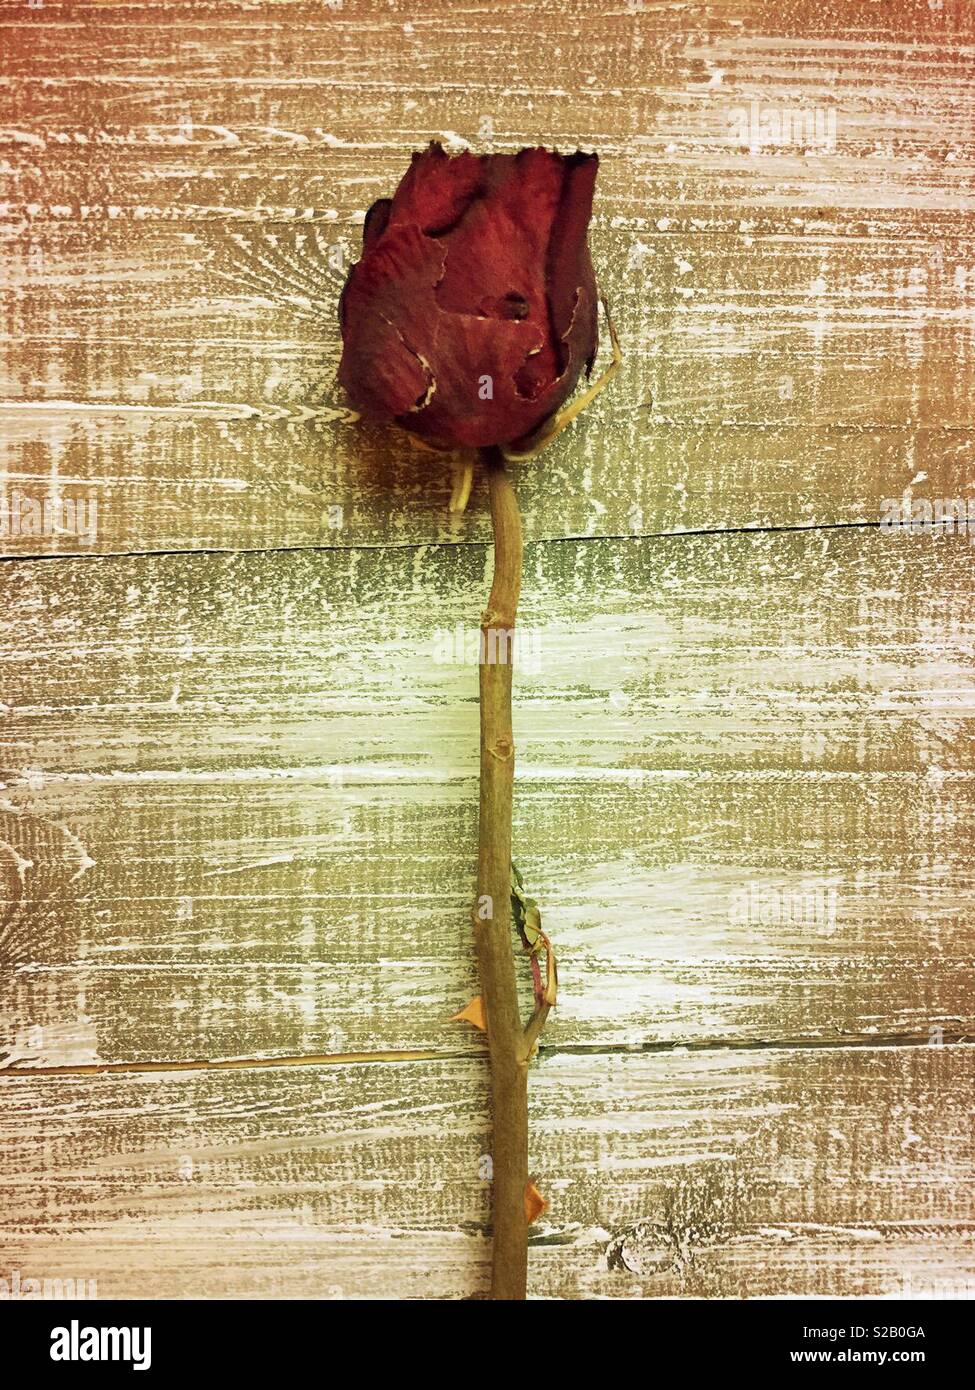 Old decaying dry red rose Stock Photo